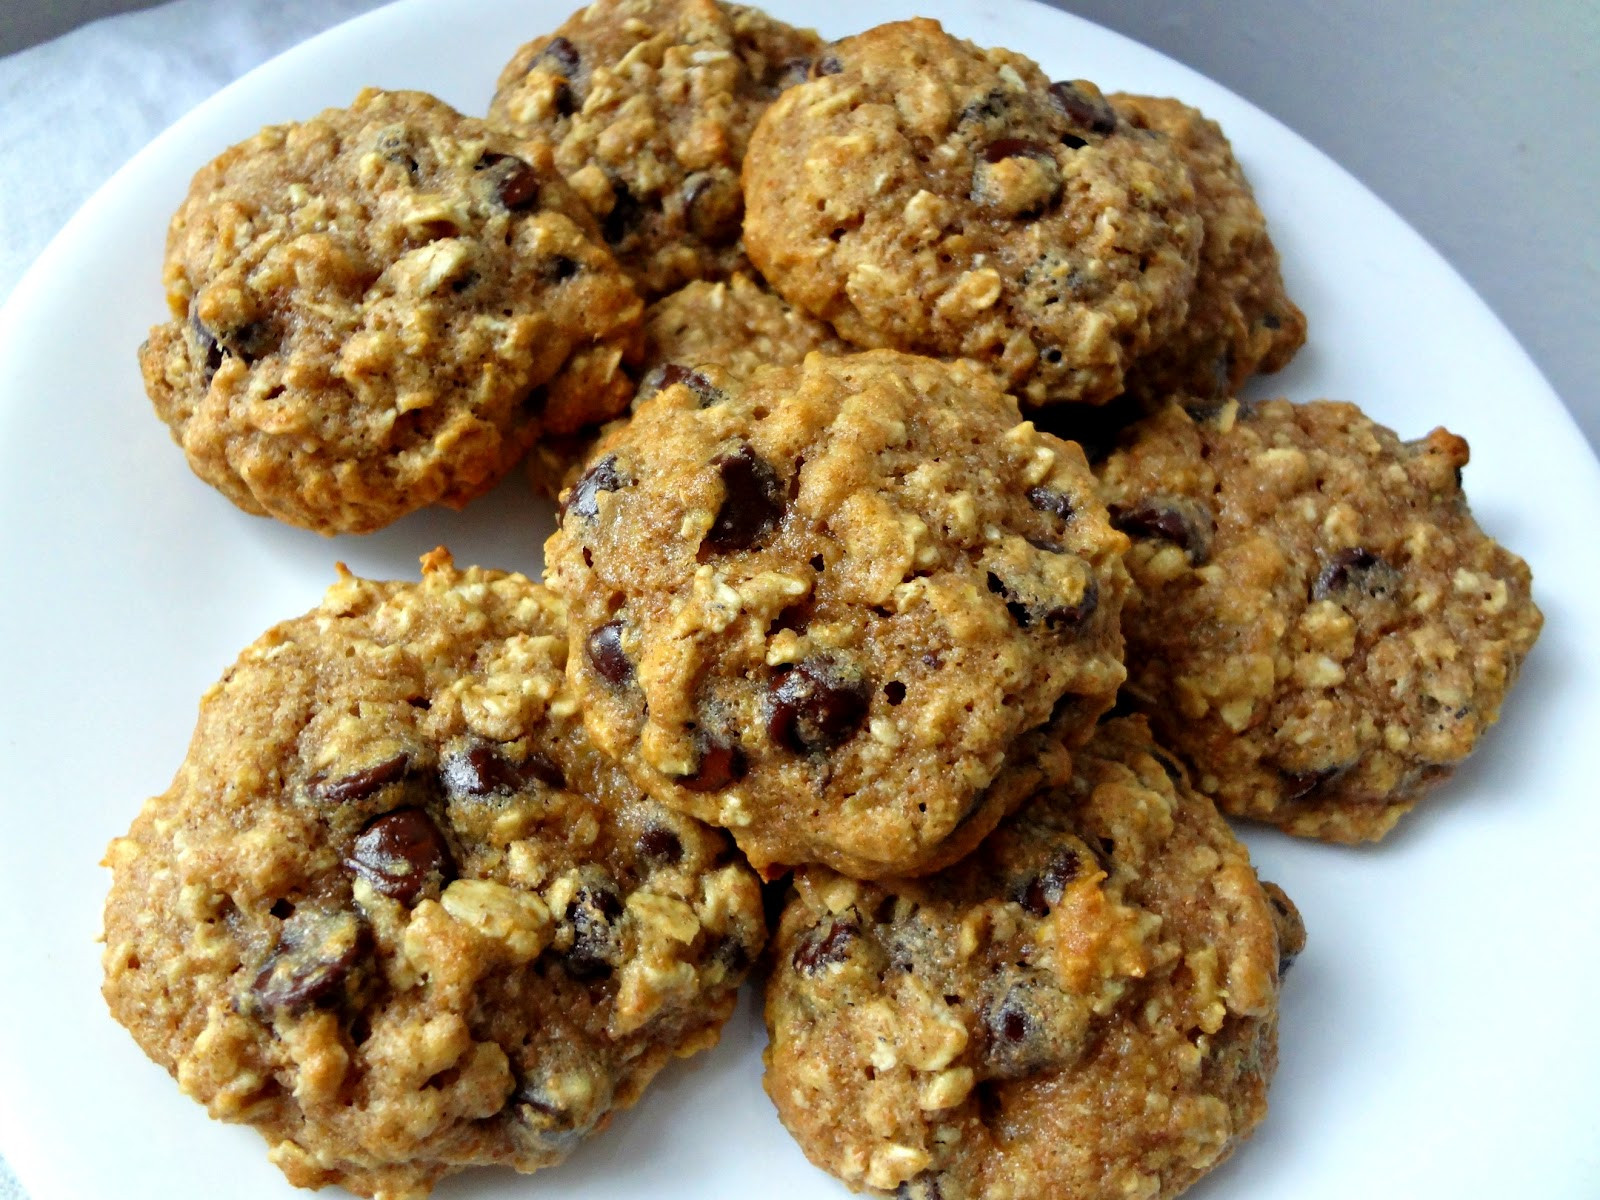 Oatmeal Cookies Healthy
 The Cooking Actress Healthy Oatmeal Chocolate Chip Cookies